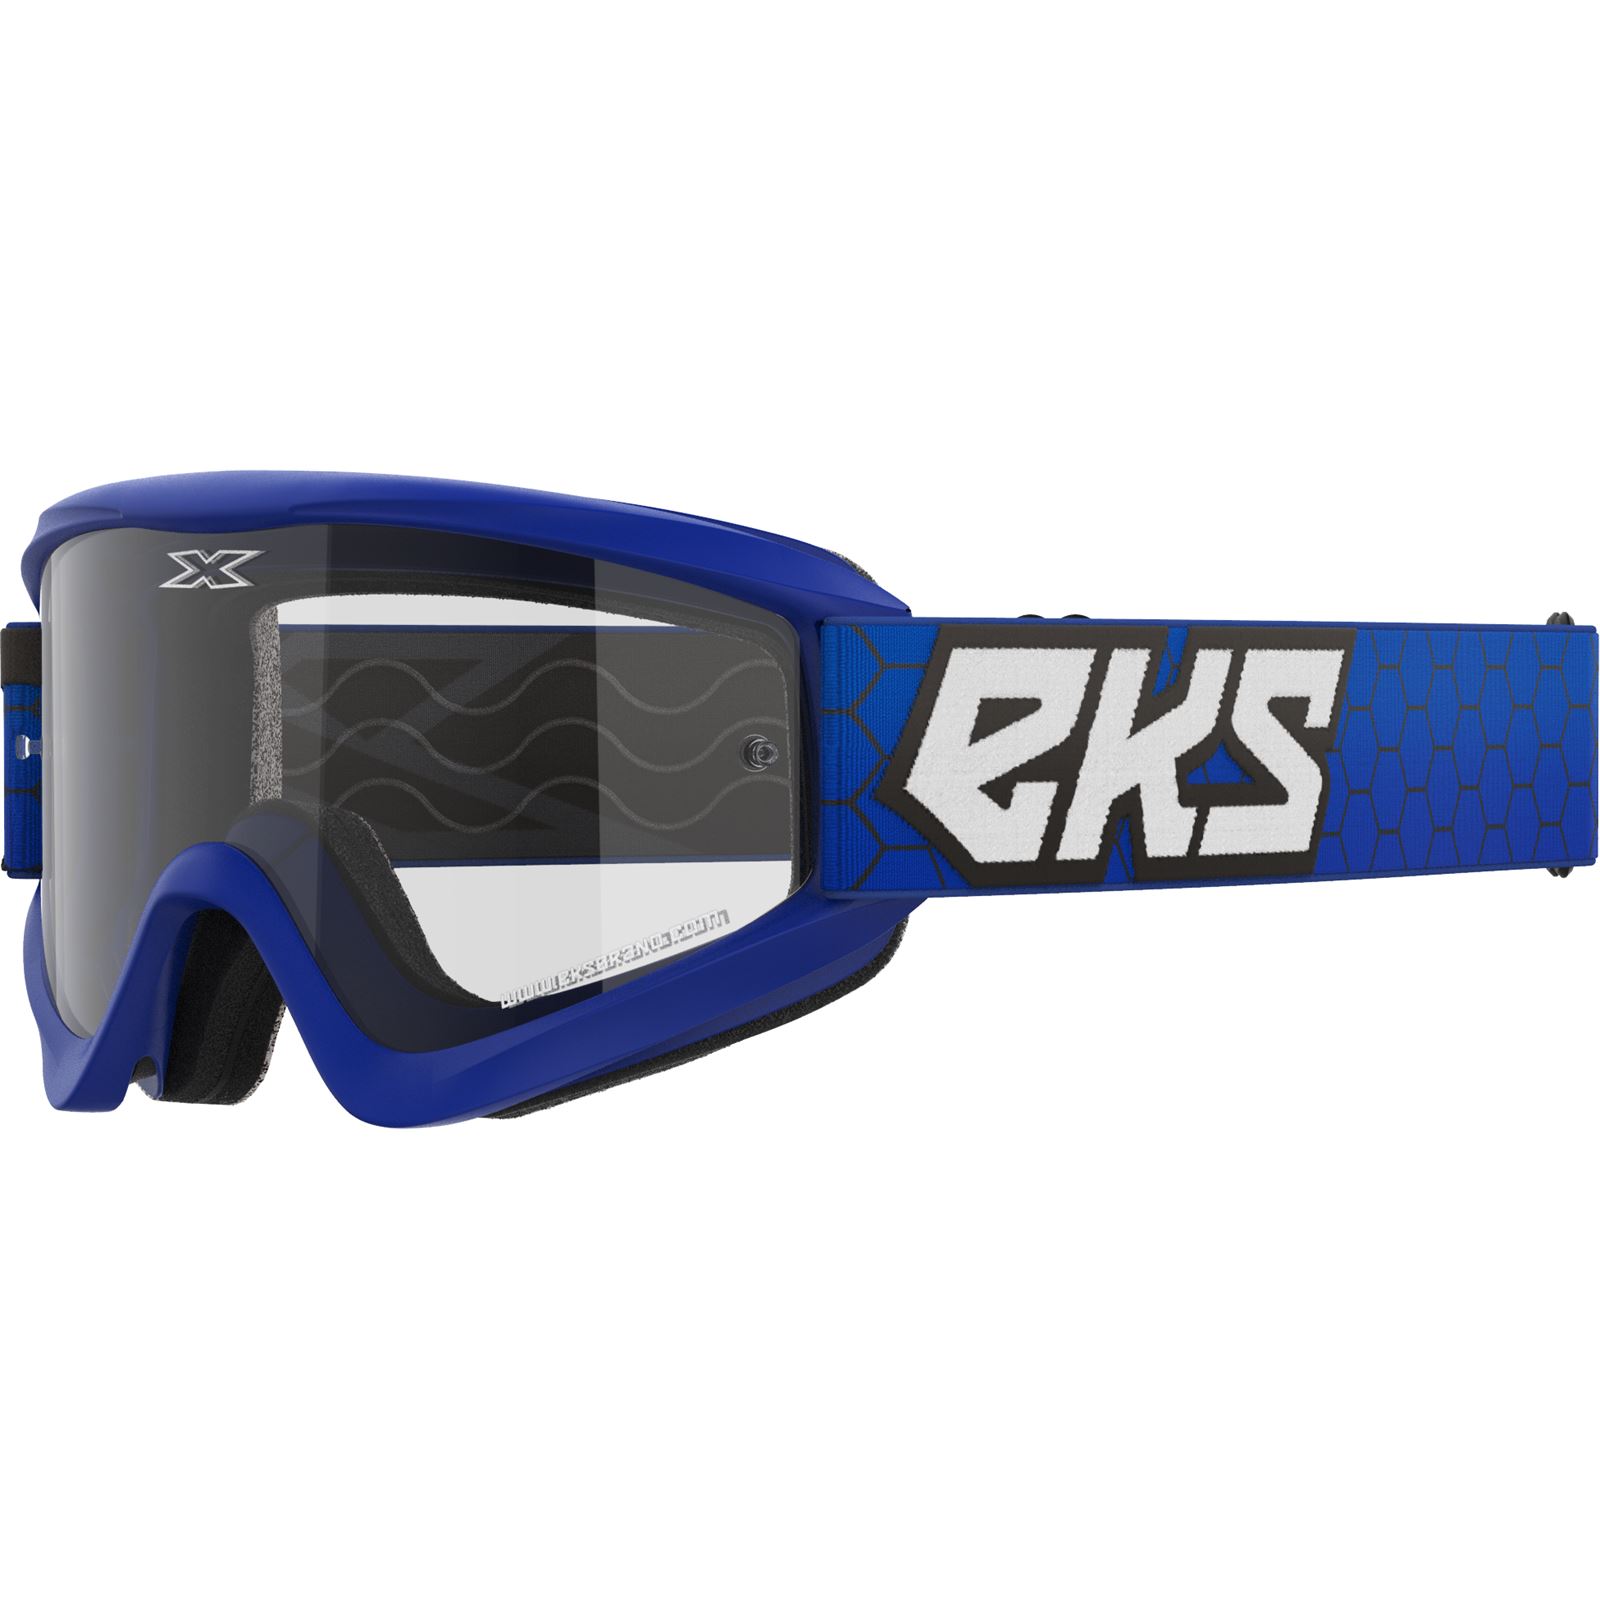 EKS Brand Flat Out Clear Goggles - Royal Blue